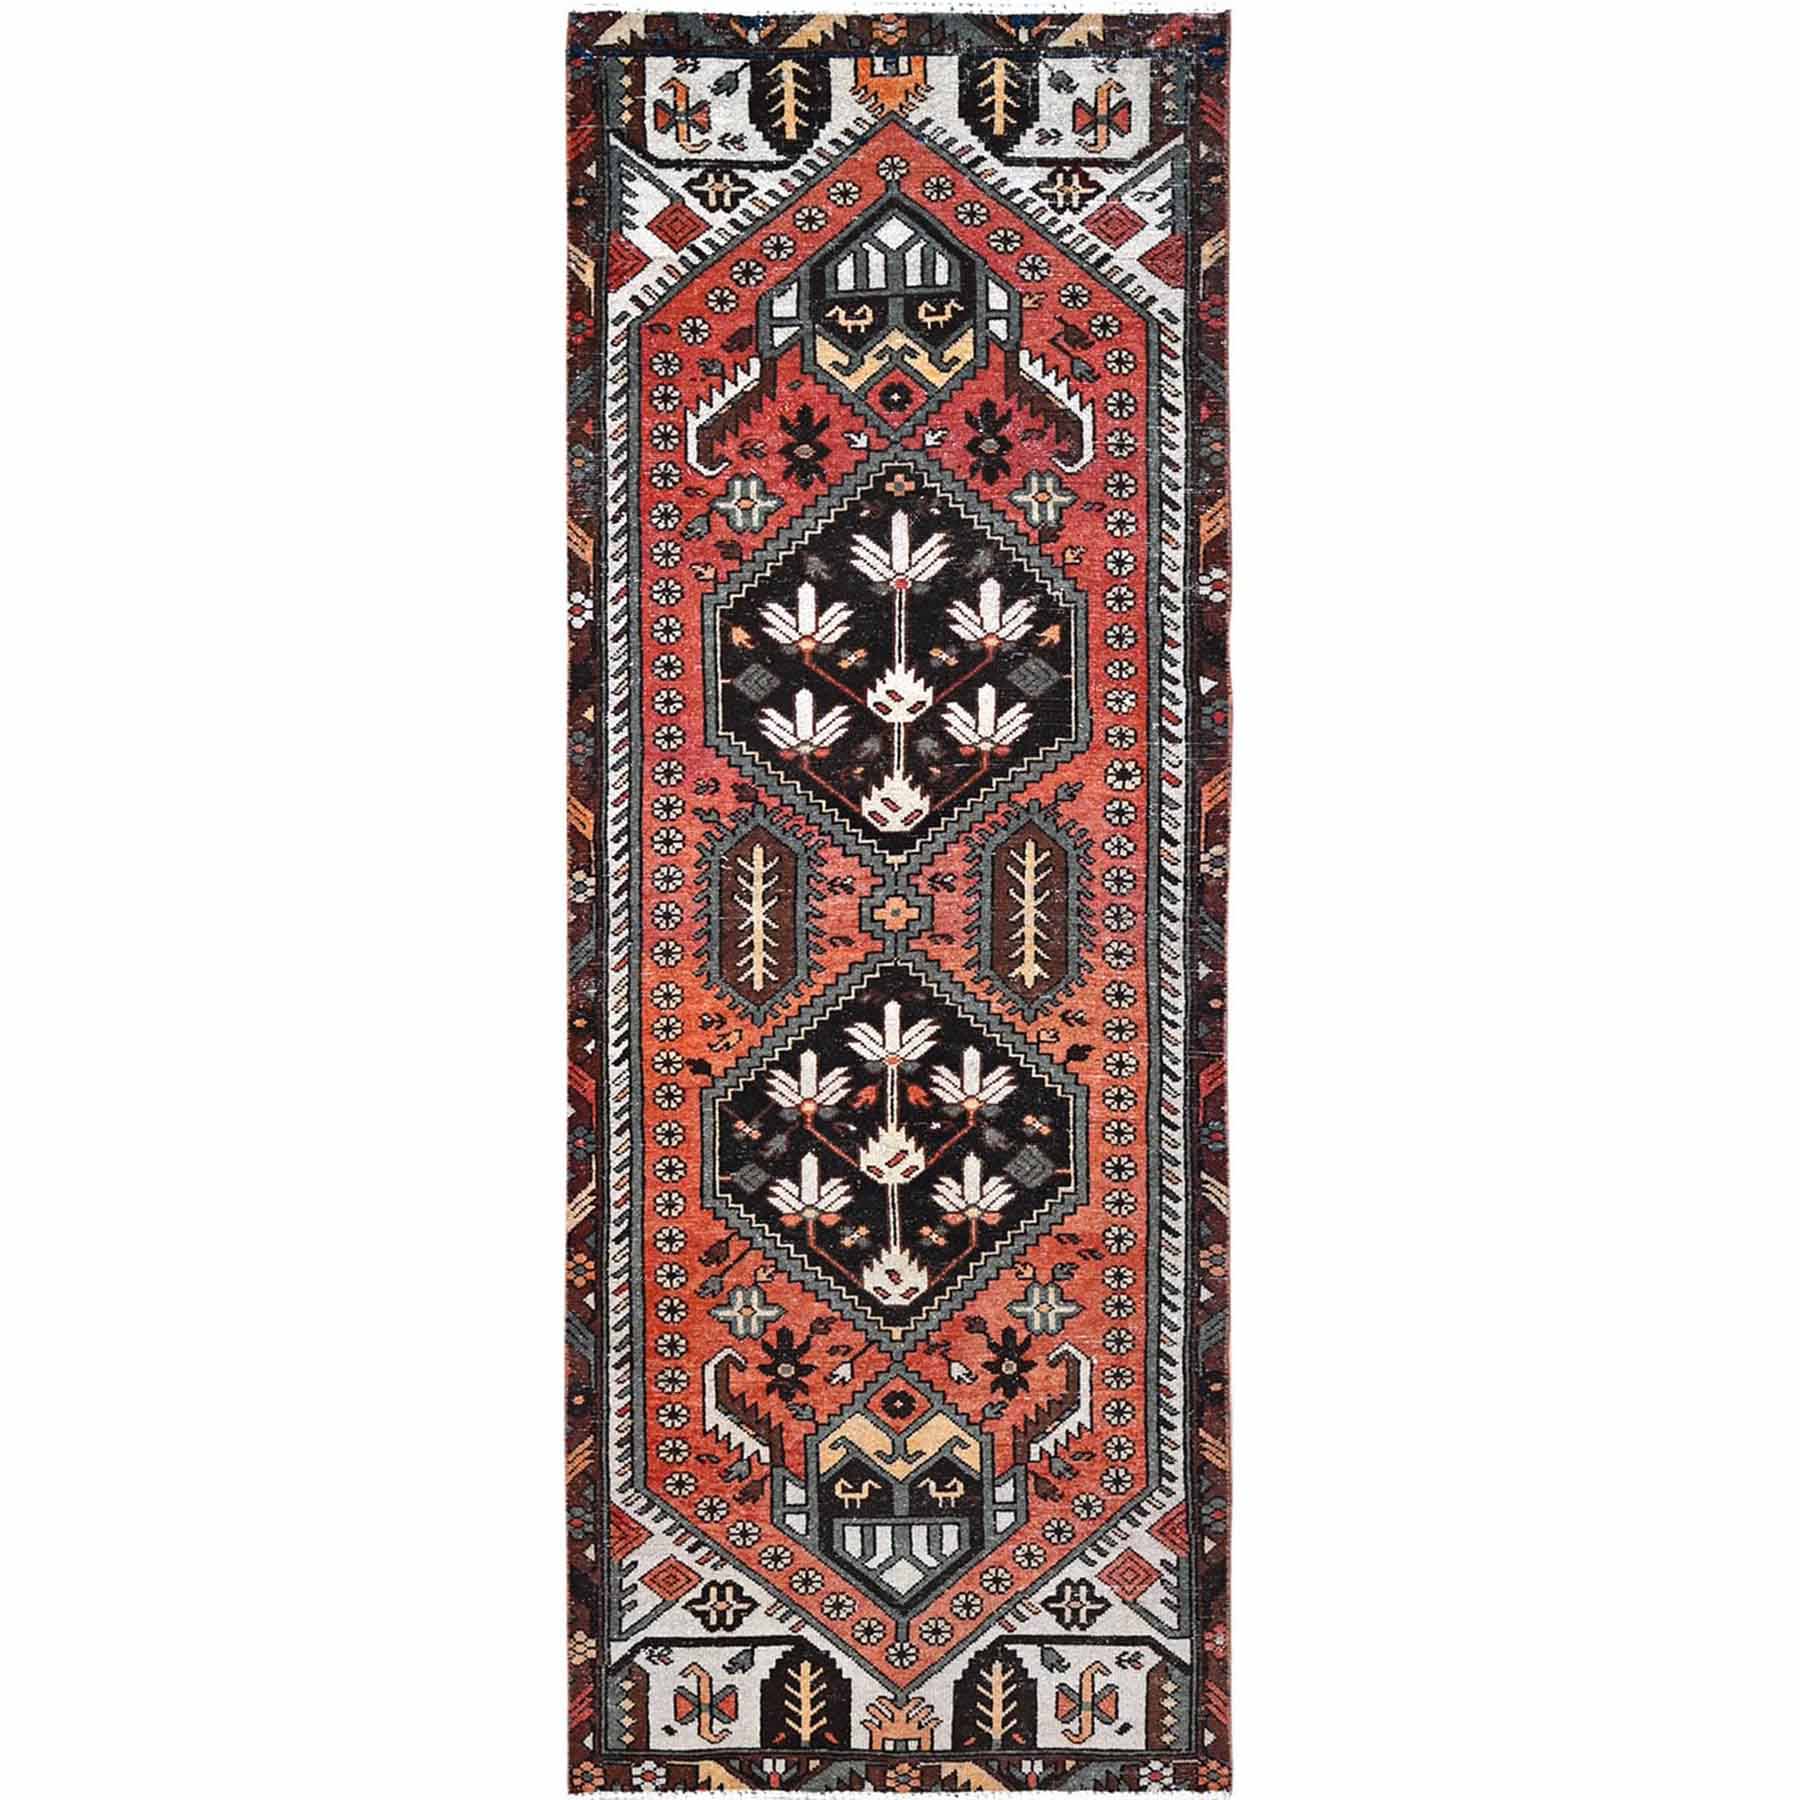 Overdyed-Vintage-Hand-Knotted-Rug-429975